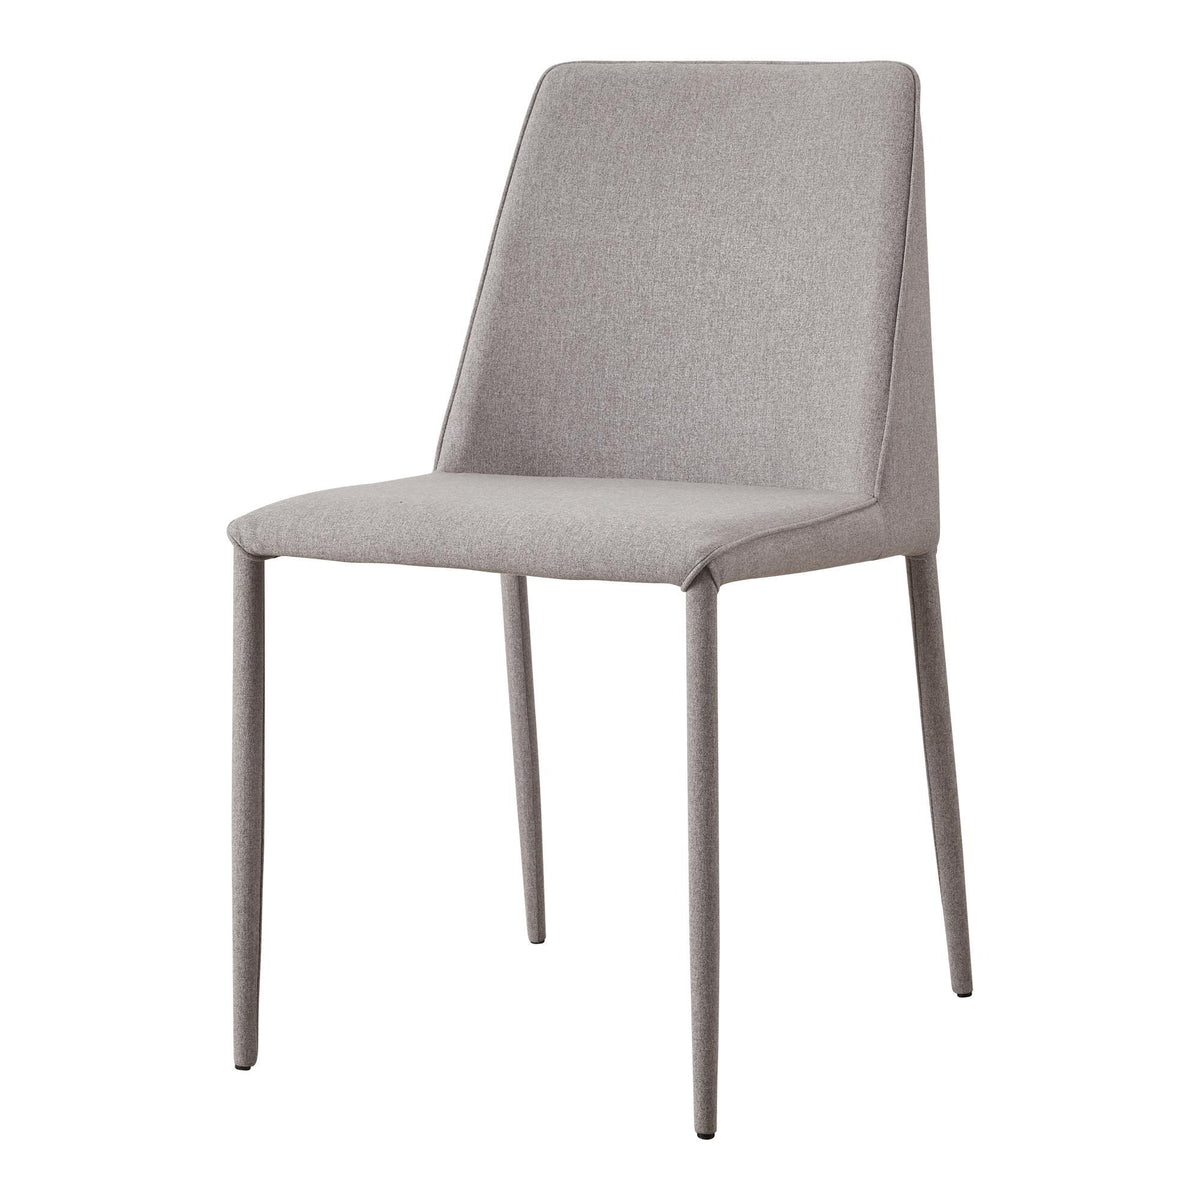 Moe's Home Collection Nora Fabric Dining Chair Light Grey-M2 - YM-1003-15